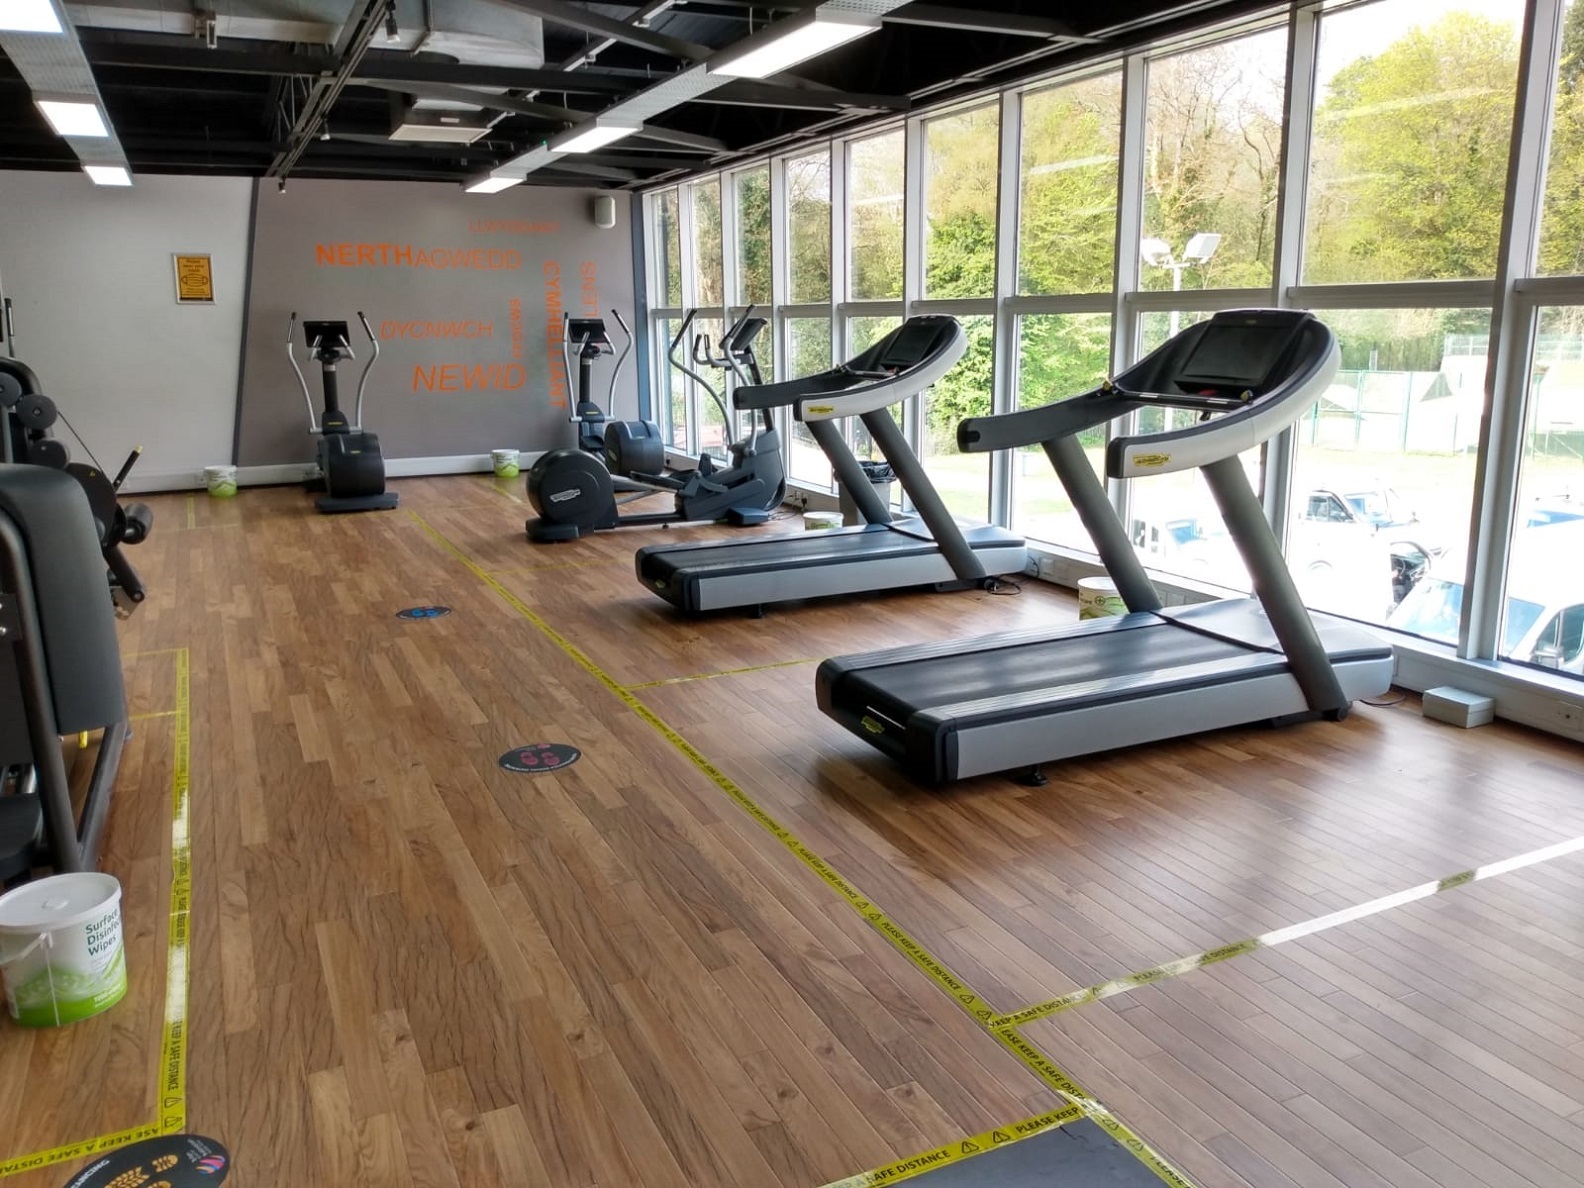 Equipment in the gym at Pontypool Active Living Centre has been spaced out to ensure social distancing.